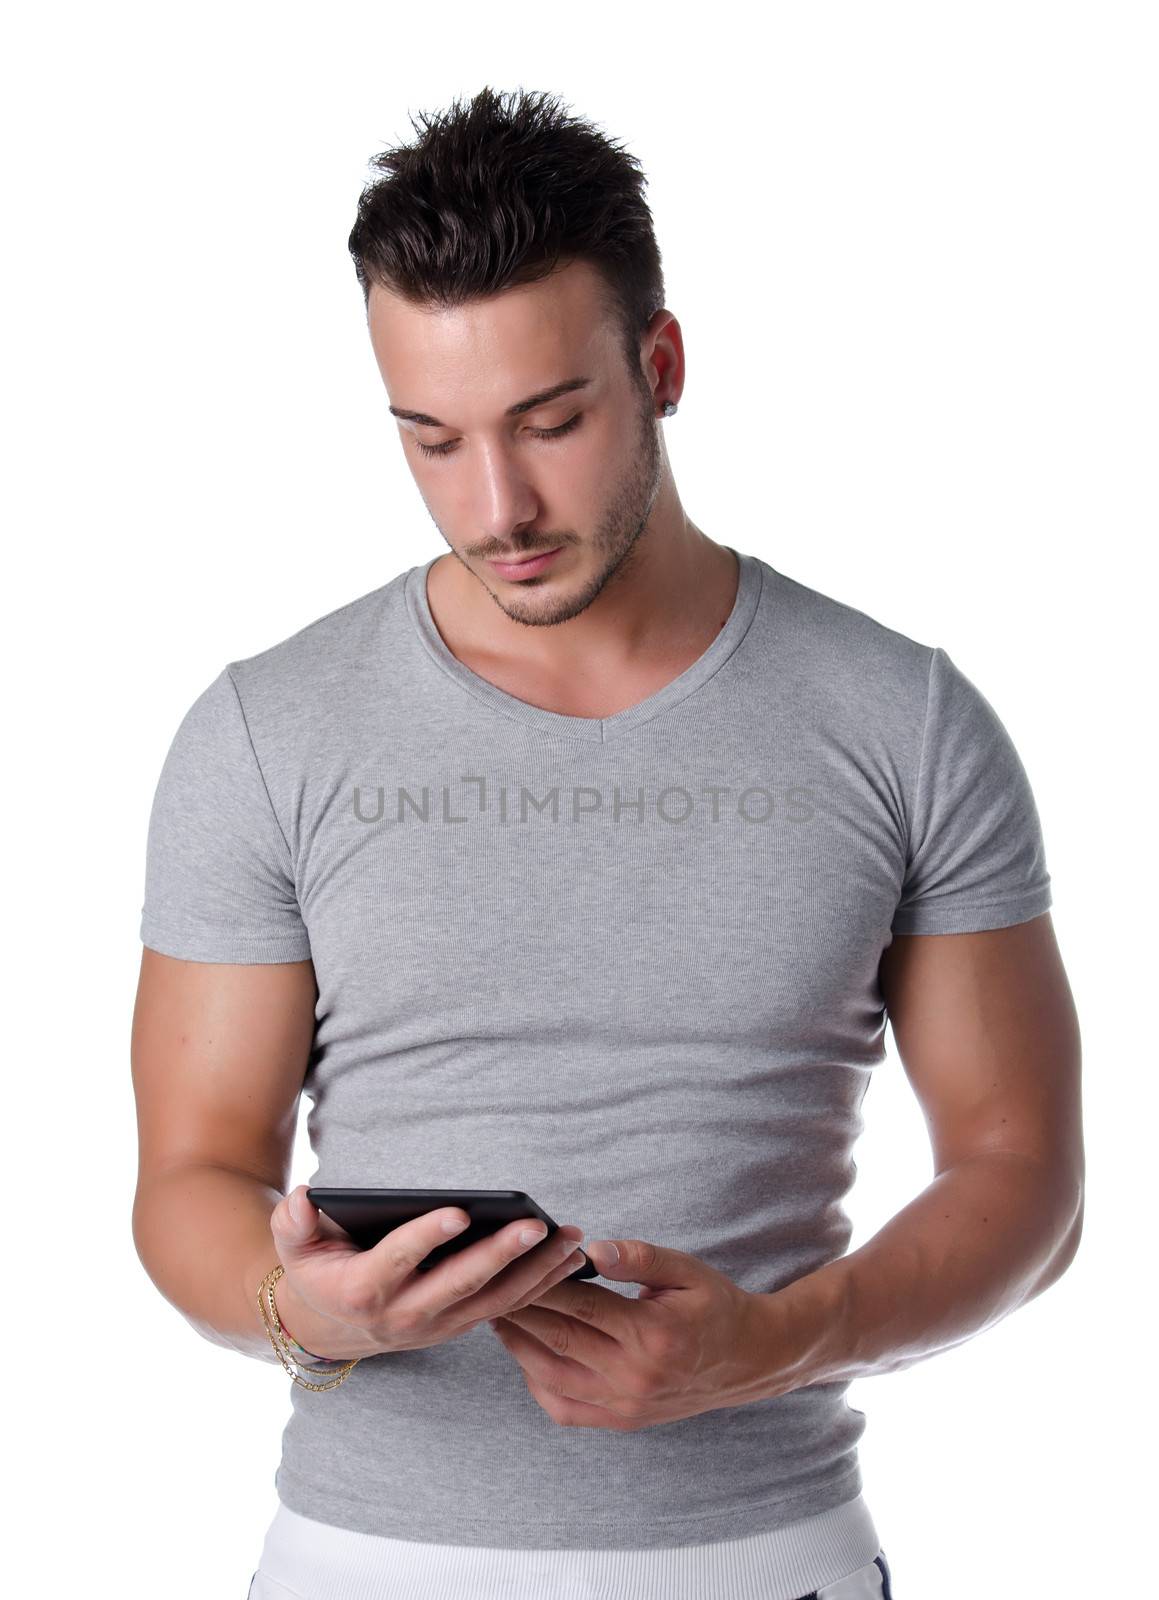 Handsome and fit young man using ebook reader, isolated on white background